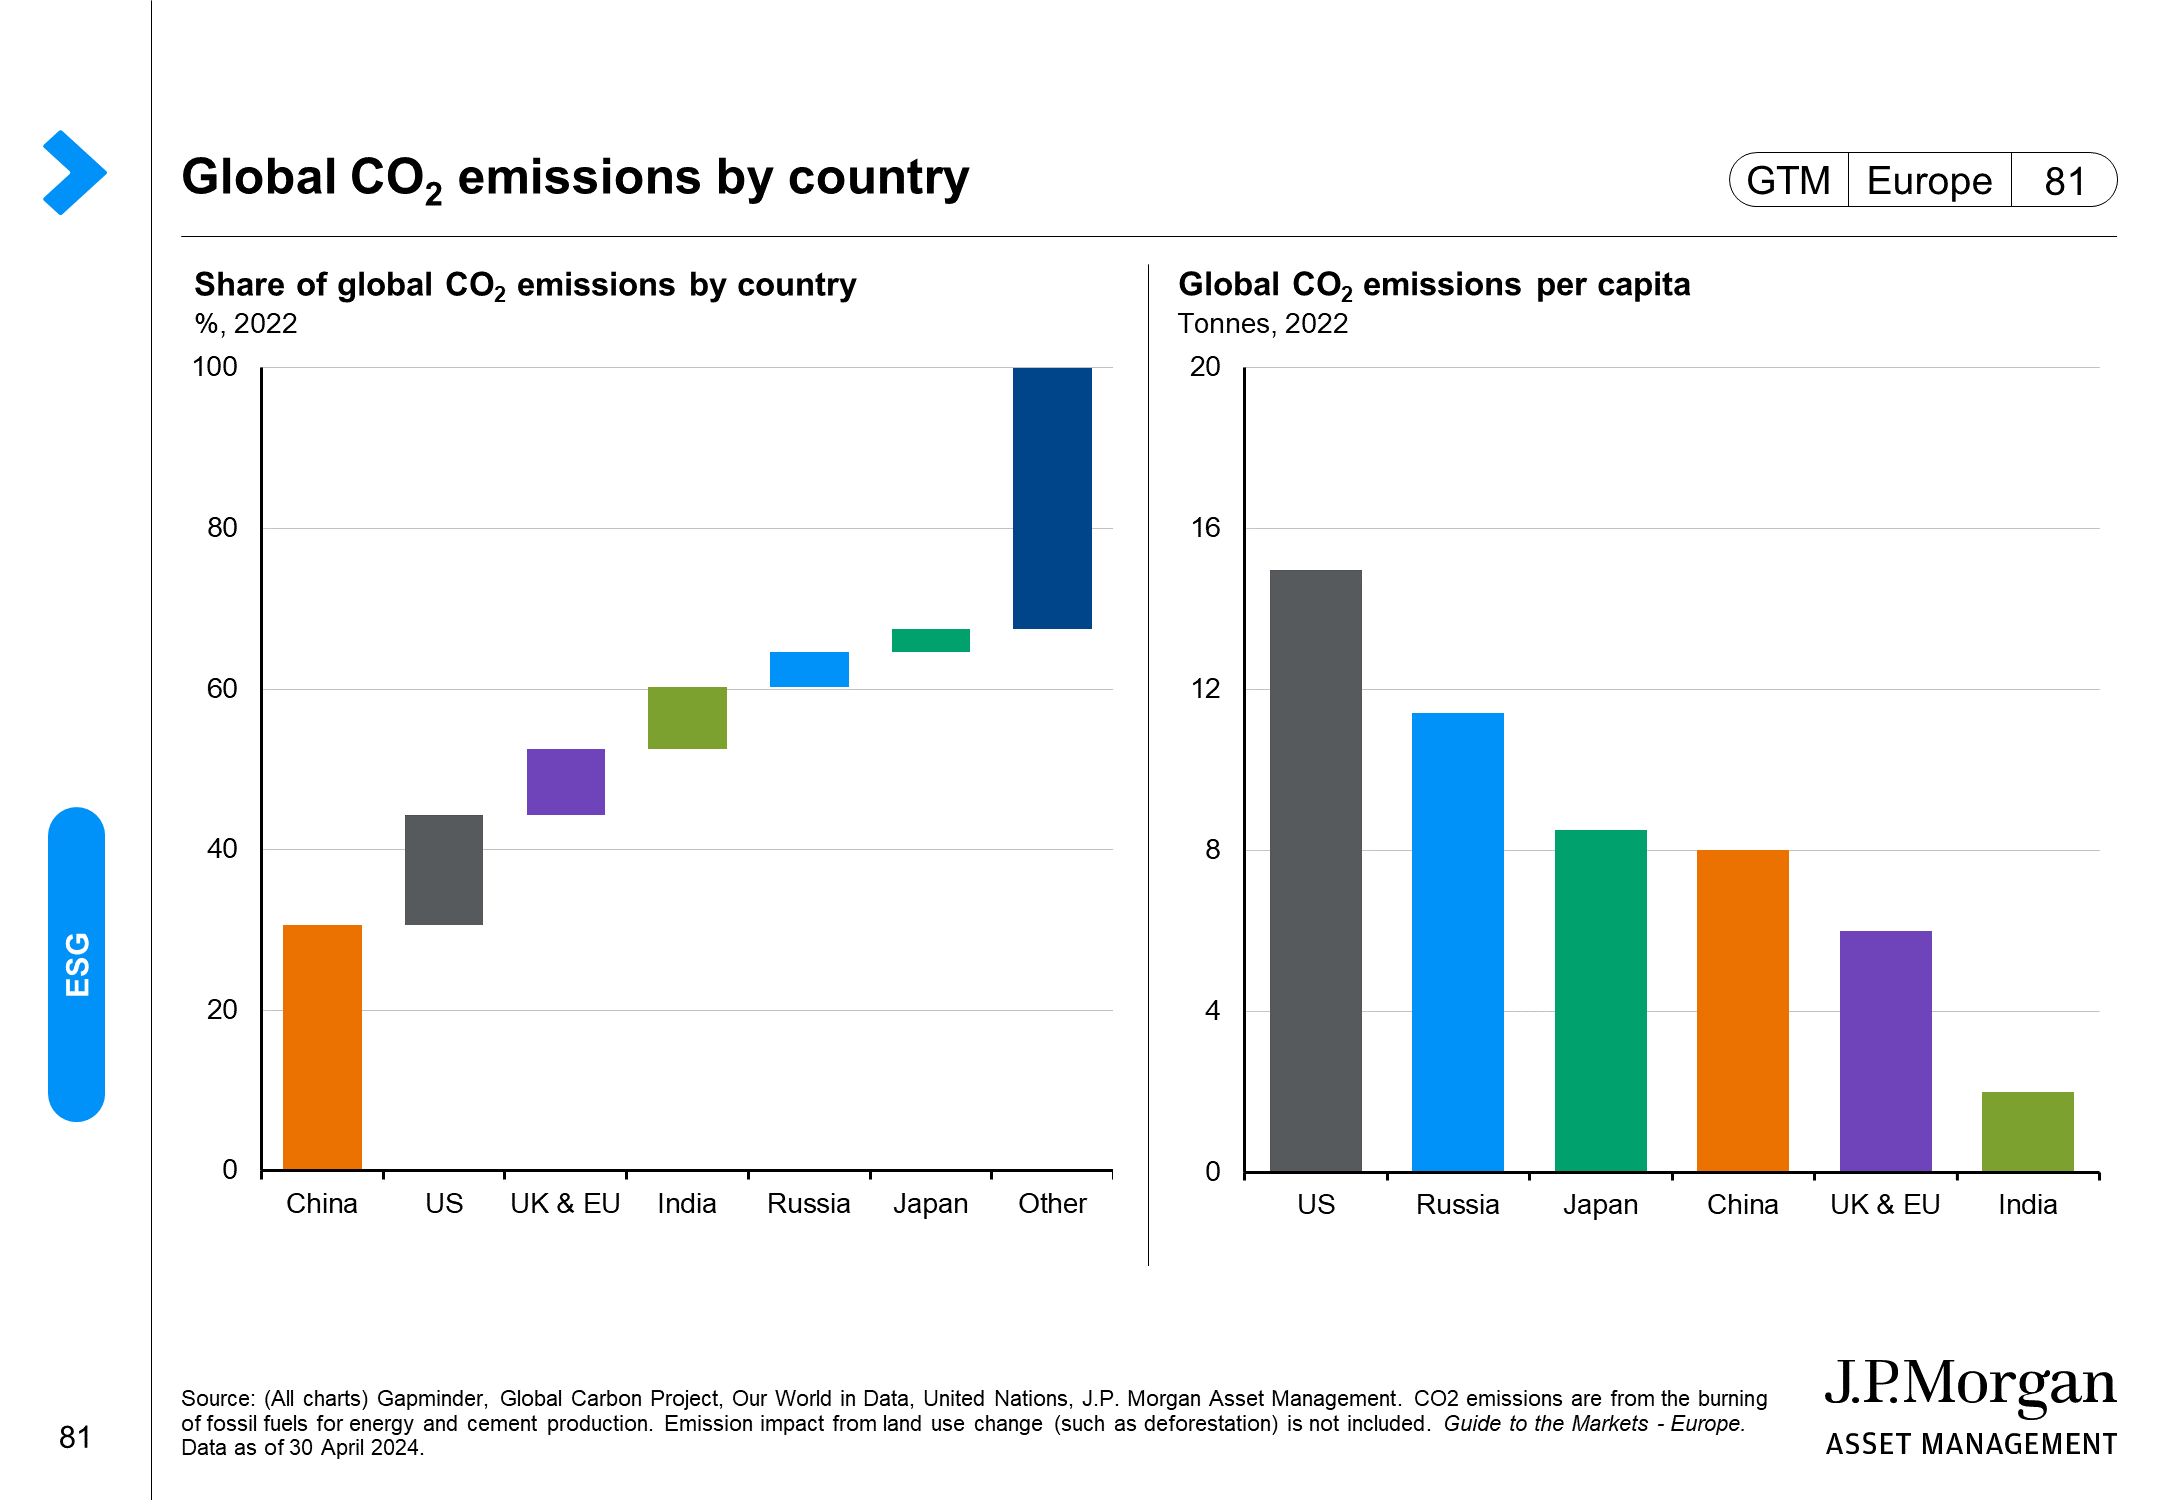 Global energy mix and greenhouse gas emissions by sector